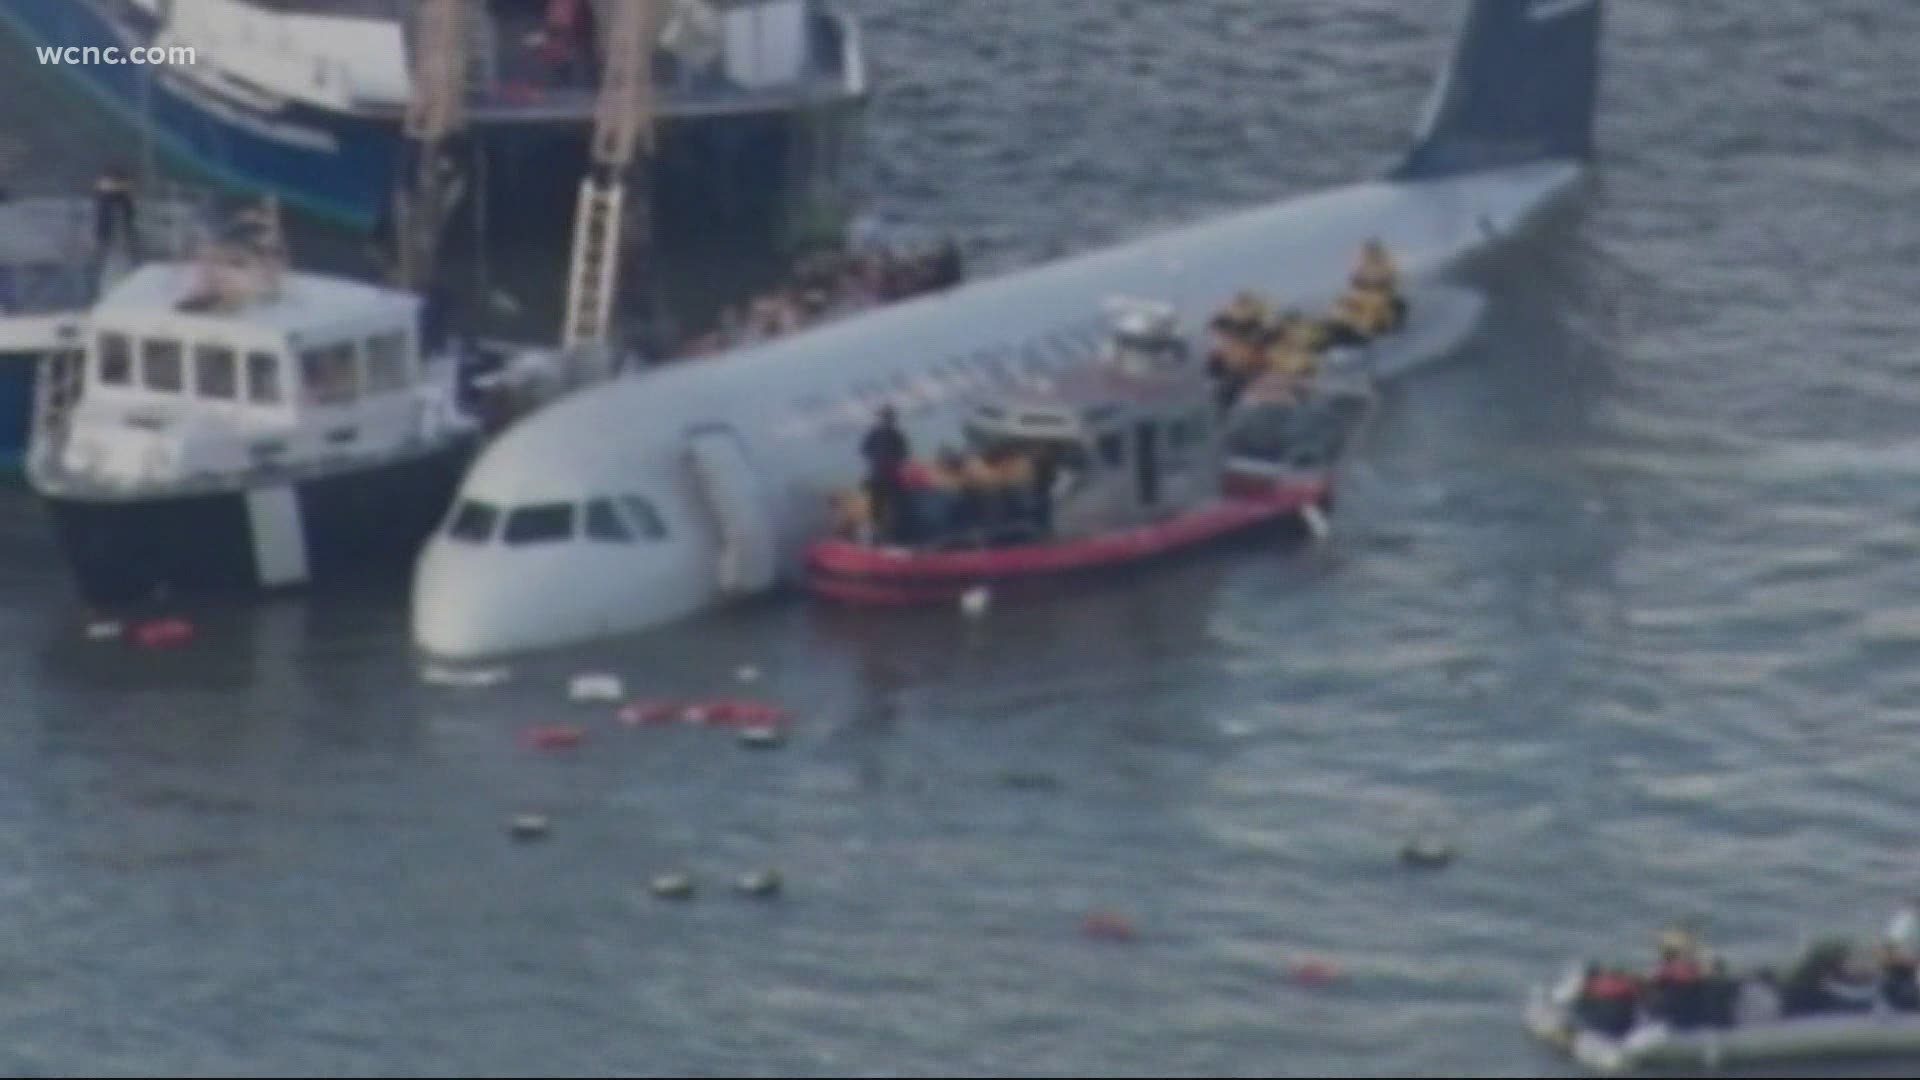 Today marks the 12-year anniversary of the Miracle on the Hudson and now, more than ever, Captain Sully is calling for unity.